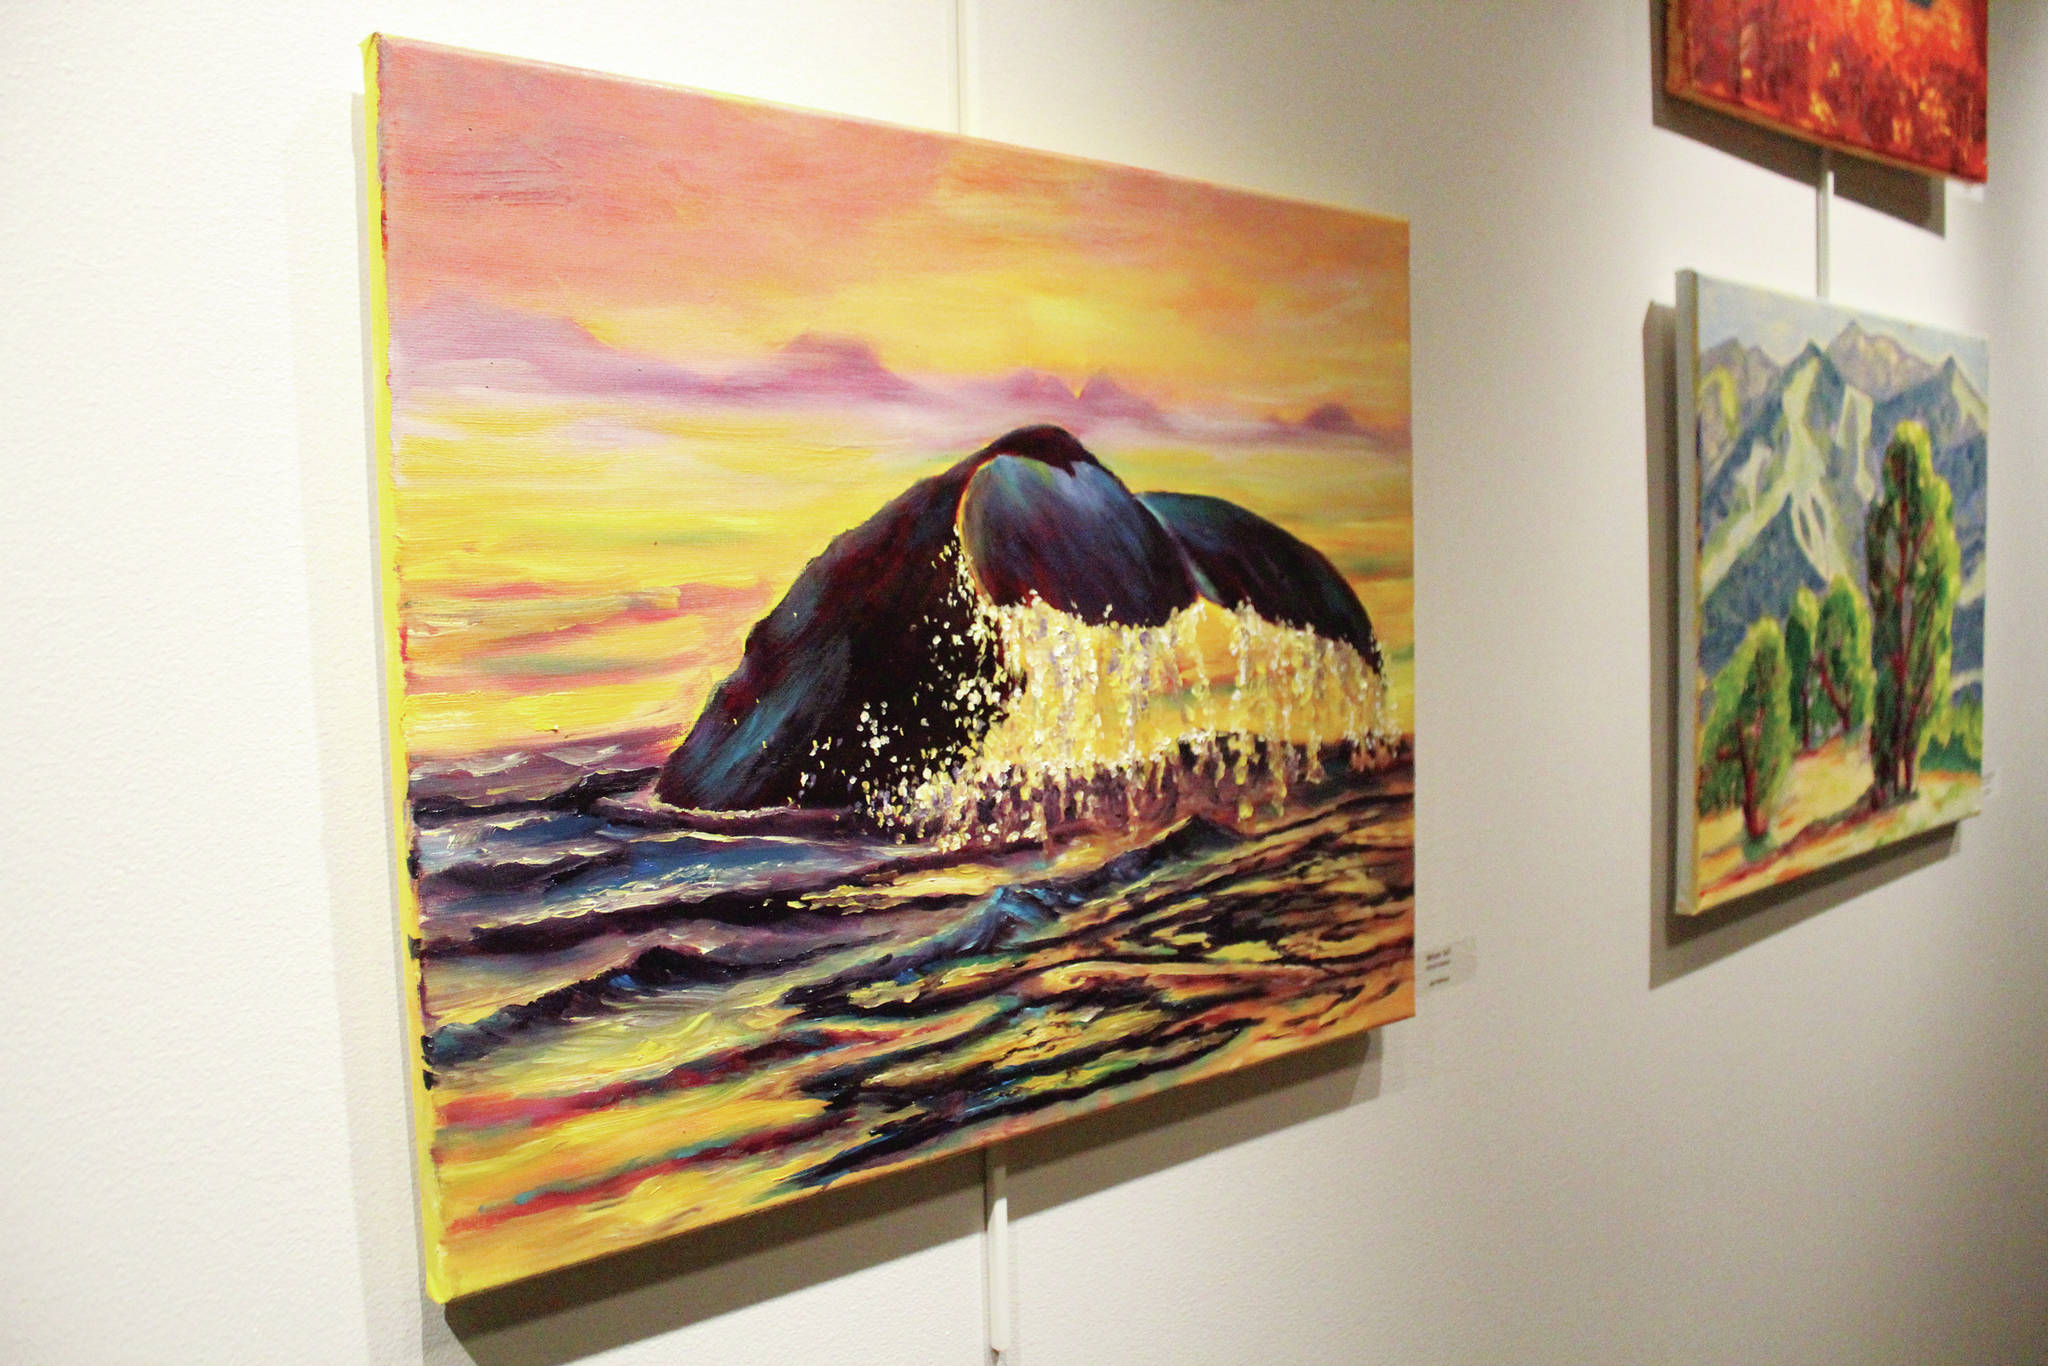 Paintings by students in Asia Freeman’s art class taught at Kachemak Bay Campus hang on the wall during a First Friday art exhibit opening Friday, Nov. 1, 2019 at the campus in Homer, Alaska. (Photo by Megan Pacer/Homer News)